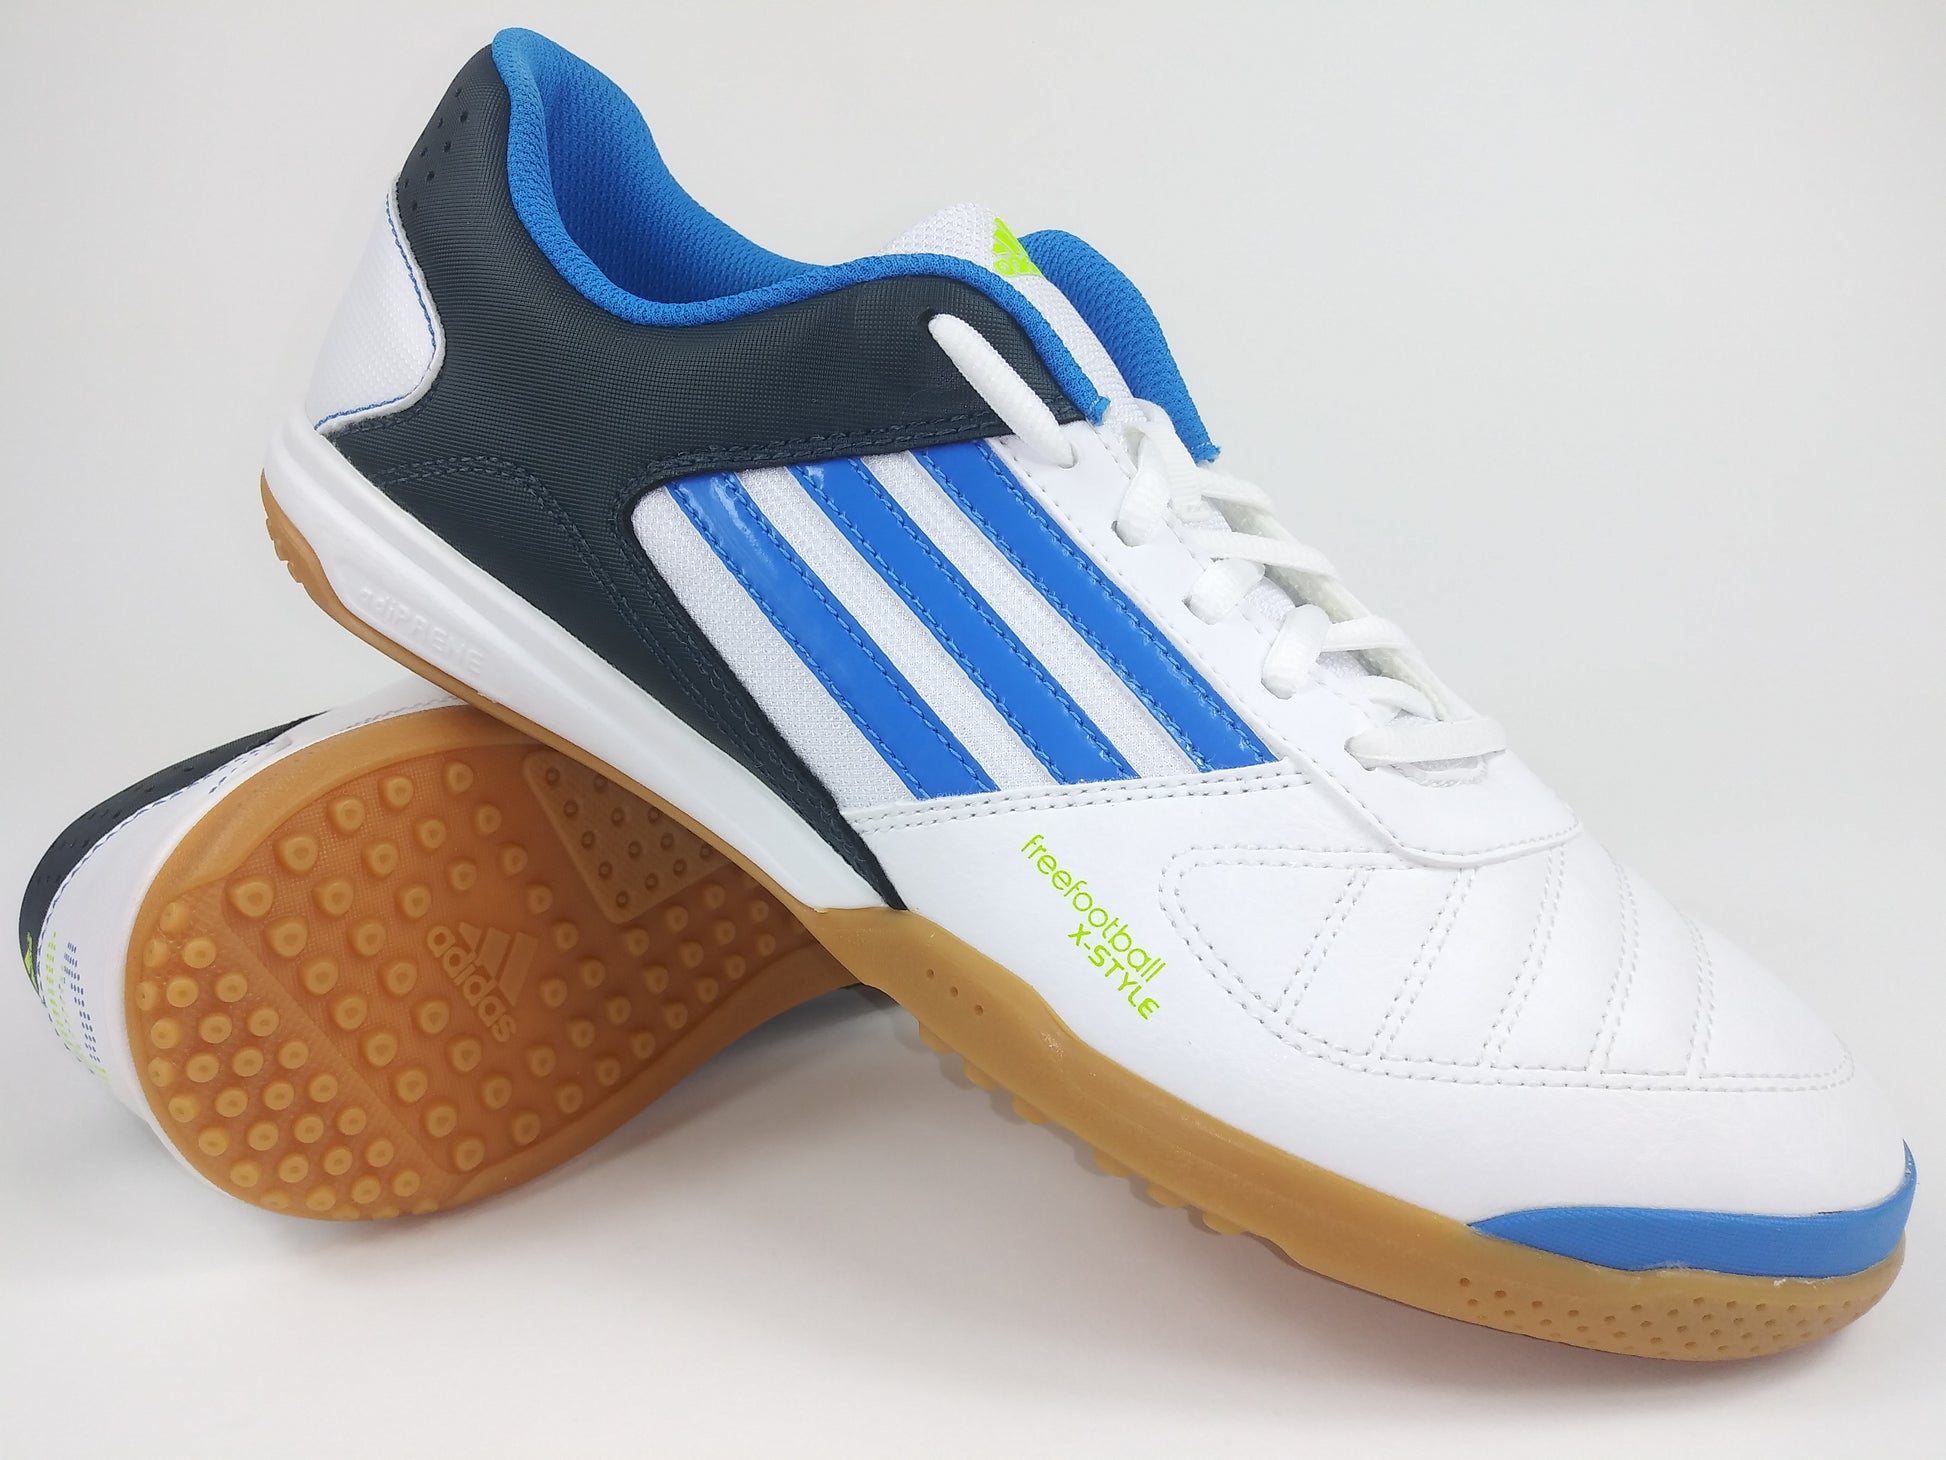 Adidas FreeFootball x-style Indoor Shoes White Blue Villegas Footwear